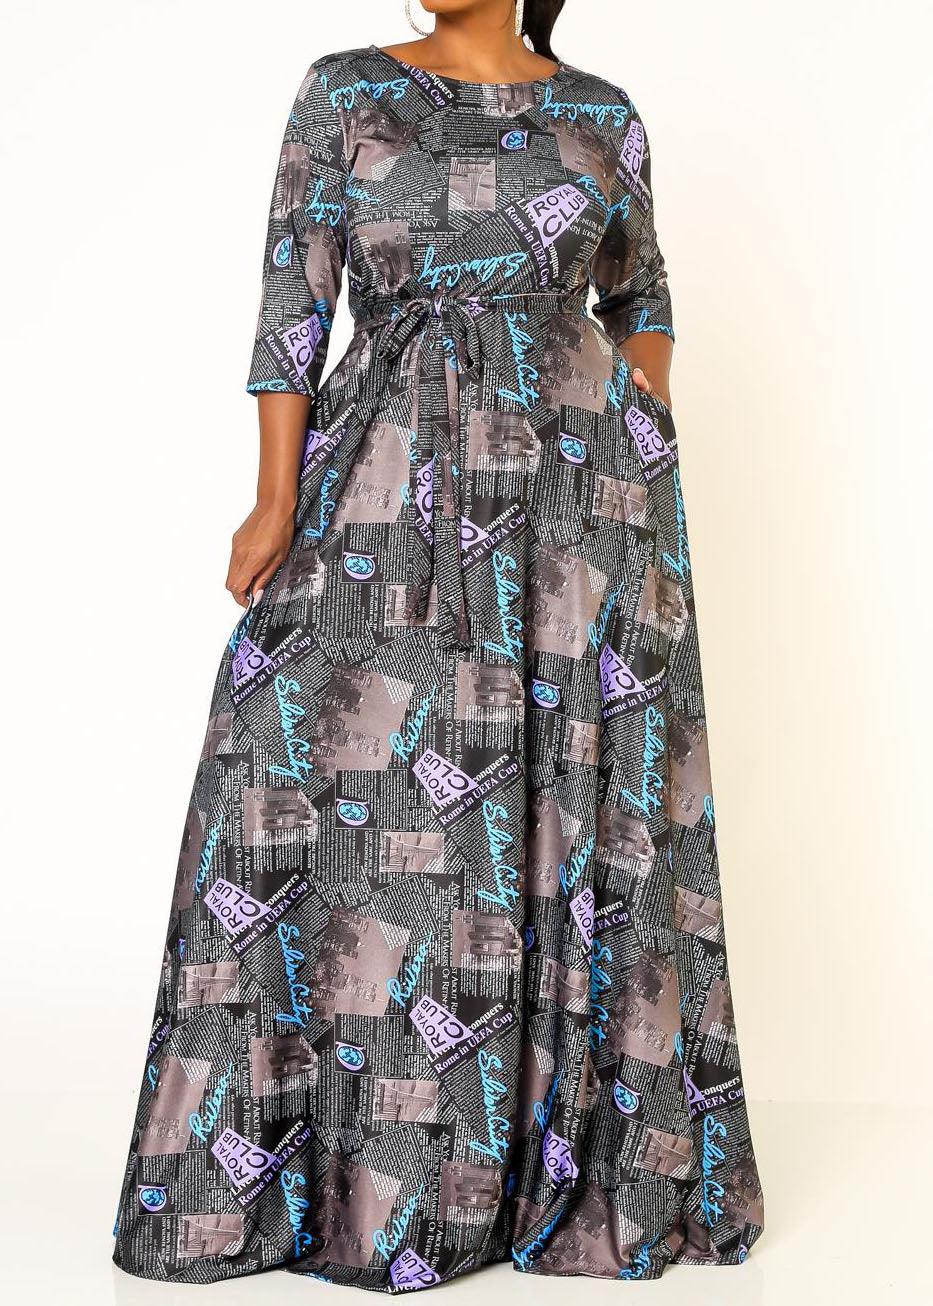 Hi Curvy Plus Size Women Letter Print Fit & Flare Maxi Dress Made In USA